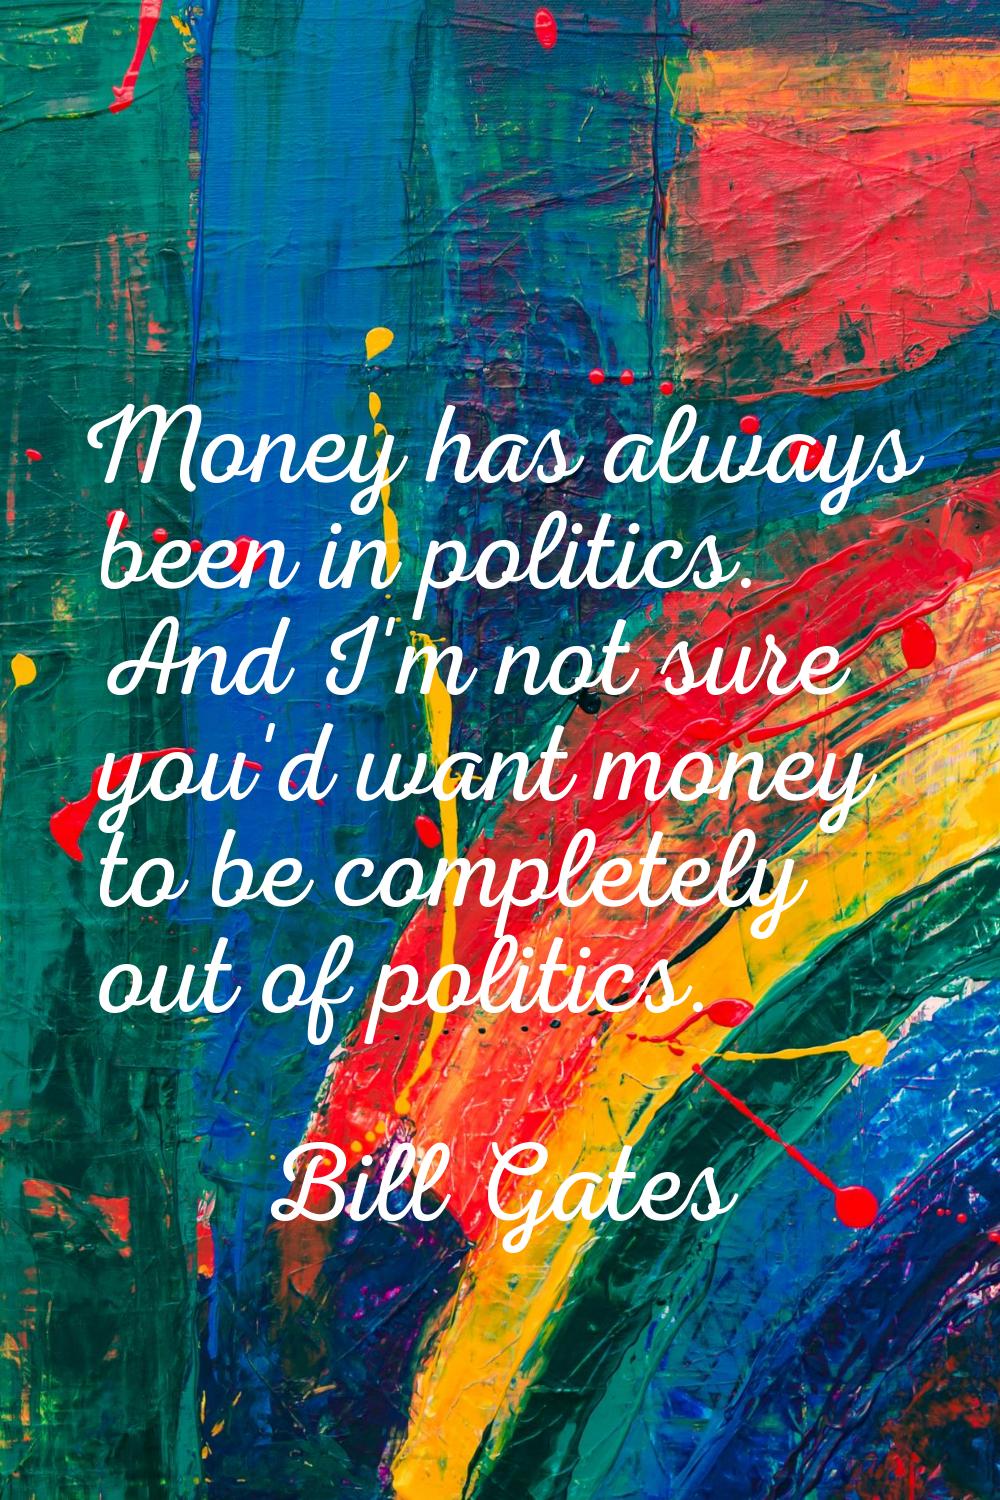 Money has always been in politics. And I'm not sure you'd want money to be completely out of politi